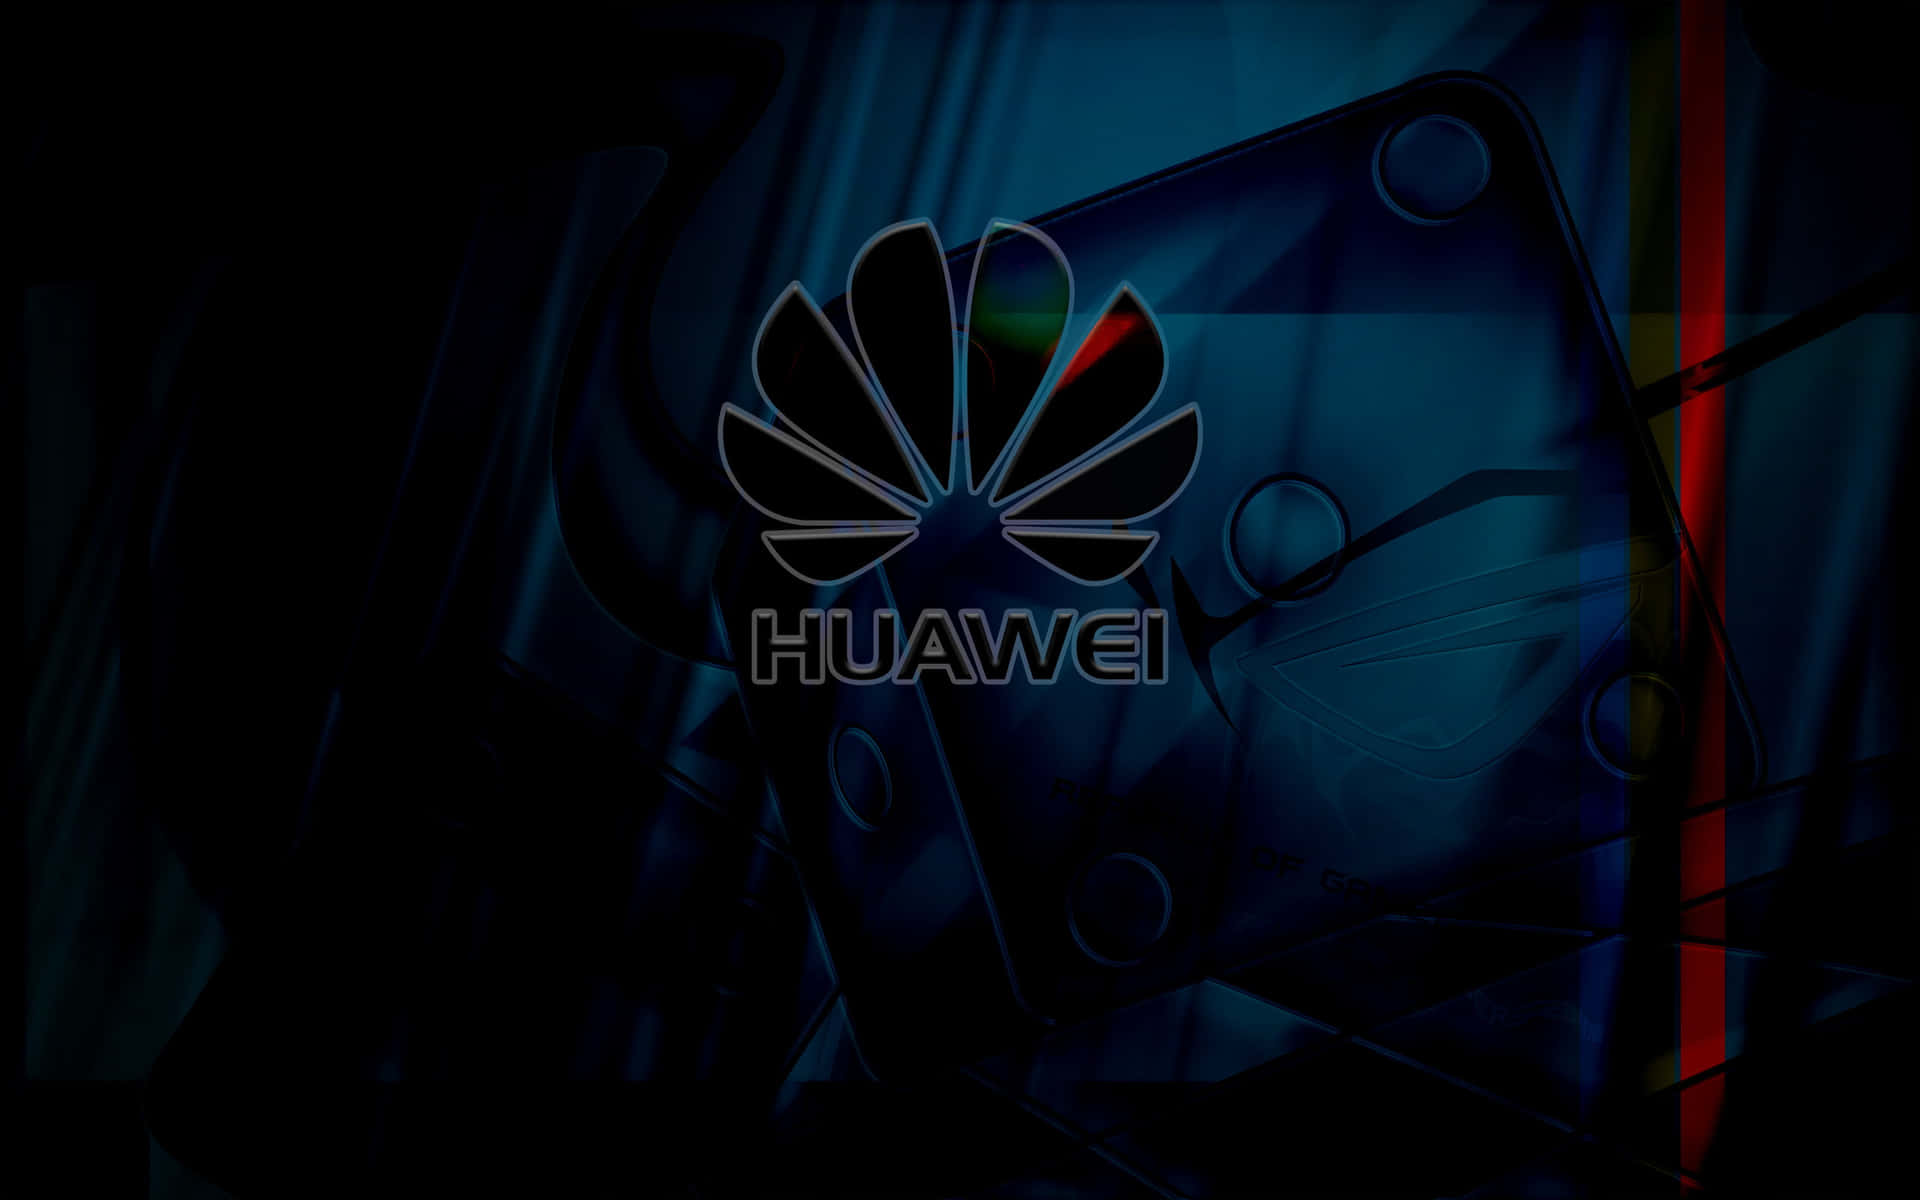 Stay connected with the Huawei P40 Pro